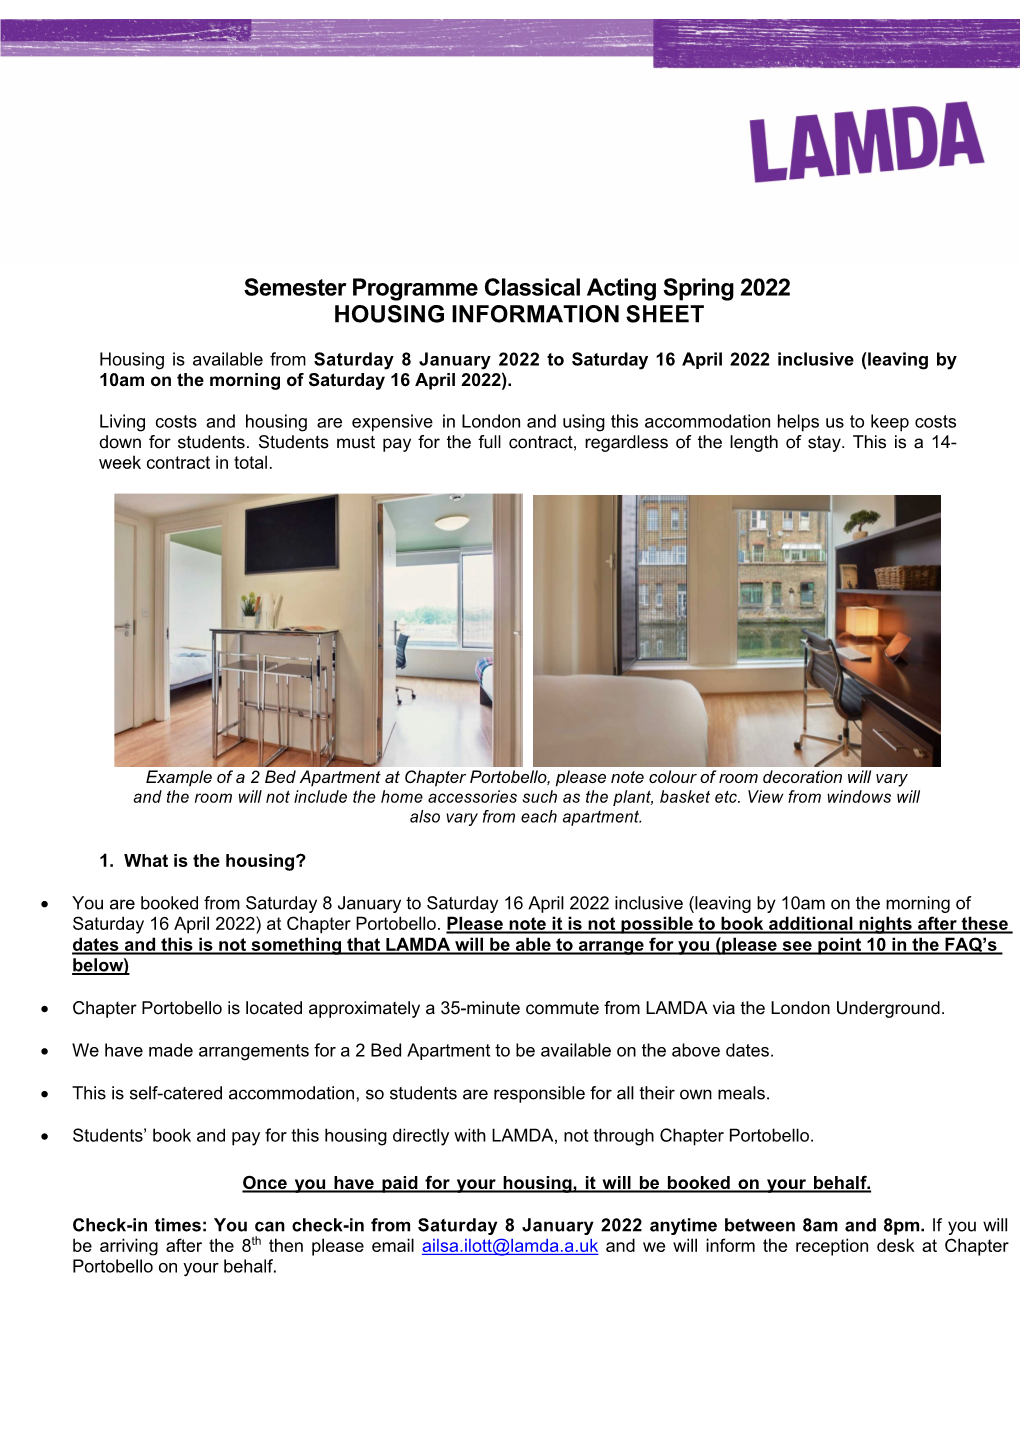 Semester Programme Classical Acting Spring 2022 HOUSING INFORMATION SHEET